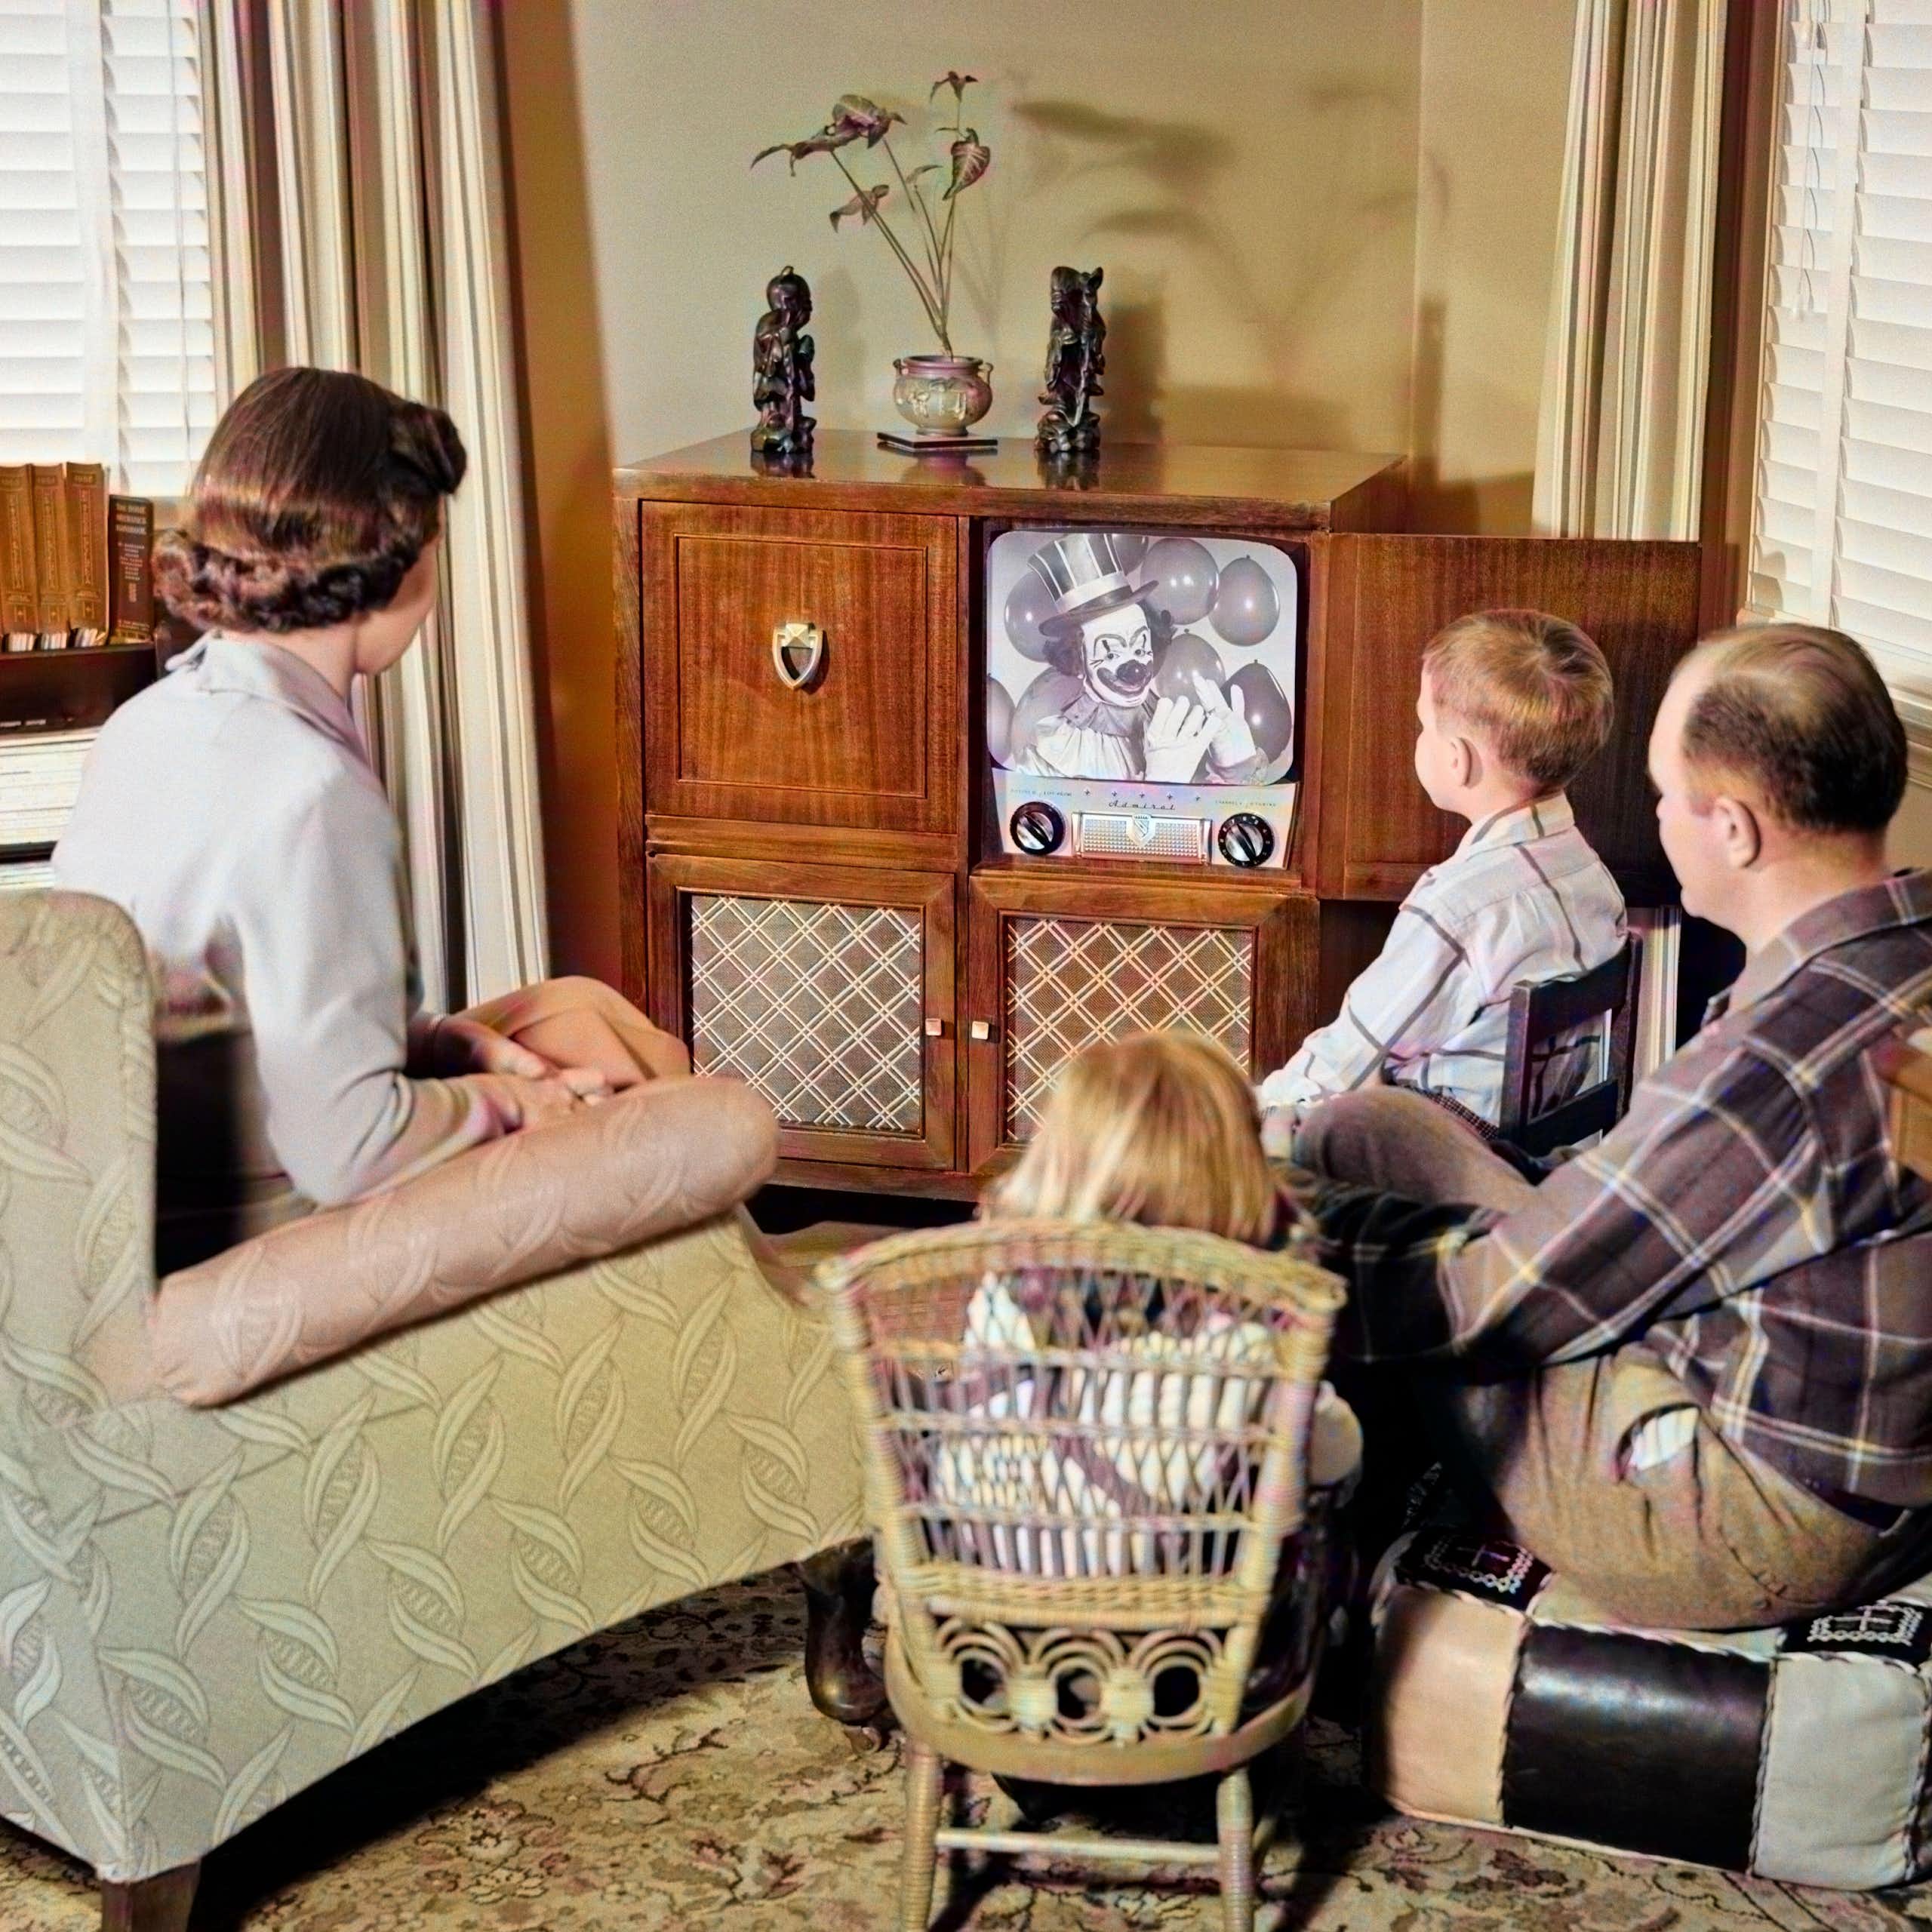 A family gathered around a television set.